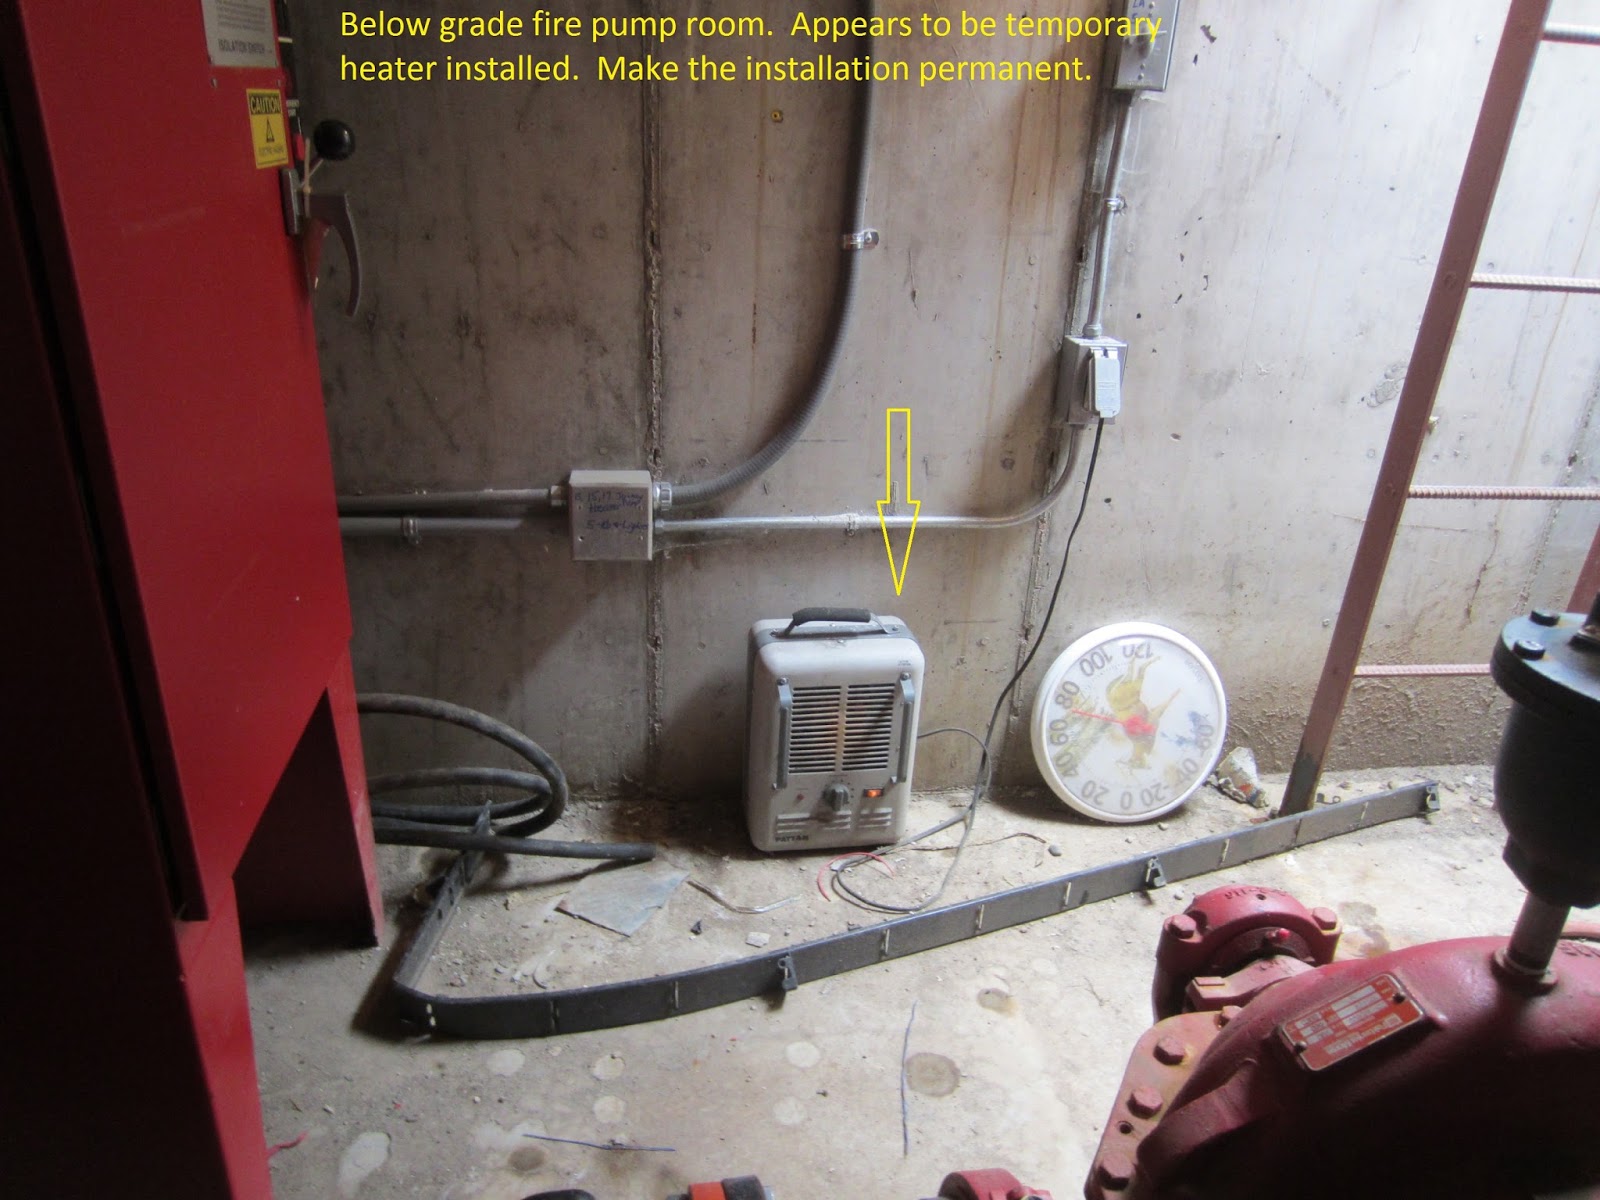 Fire Protection Deficiencies: Bad Heating Design/Install